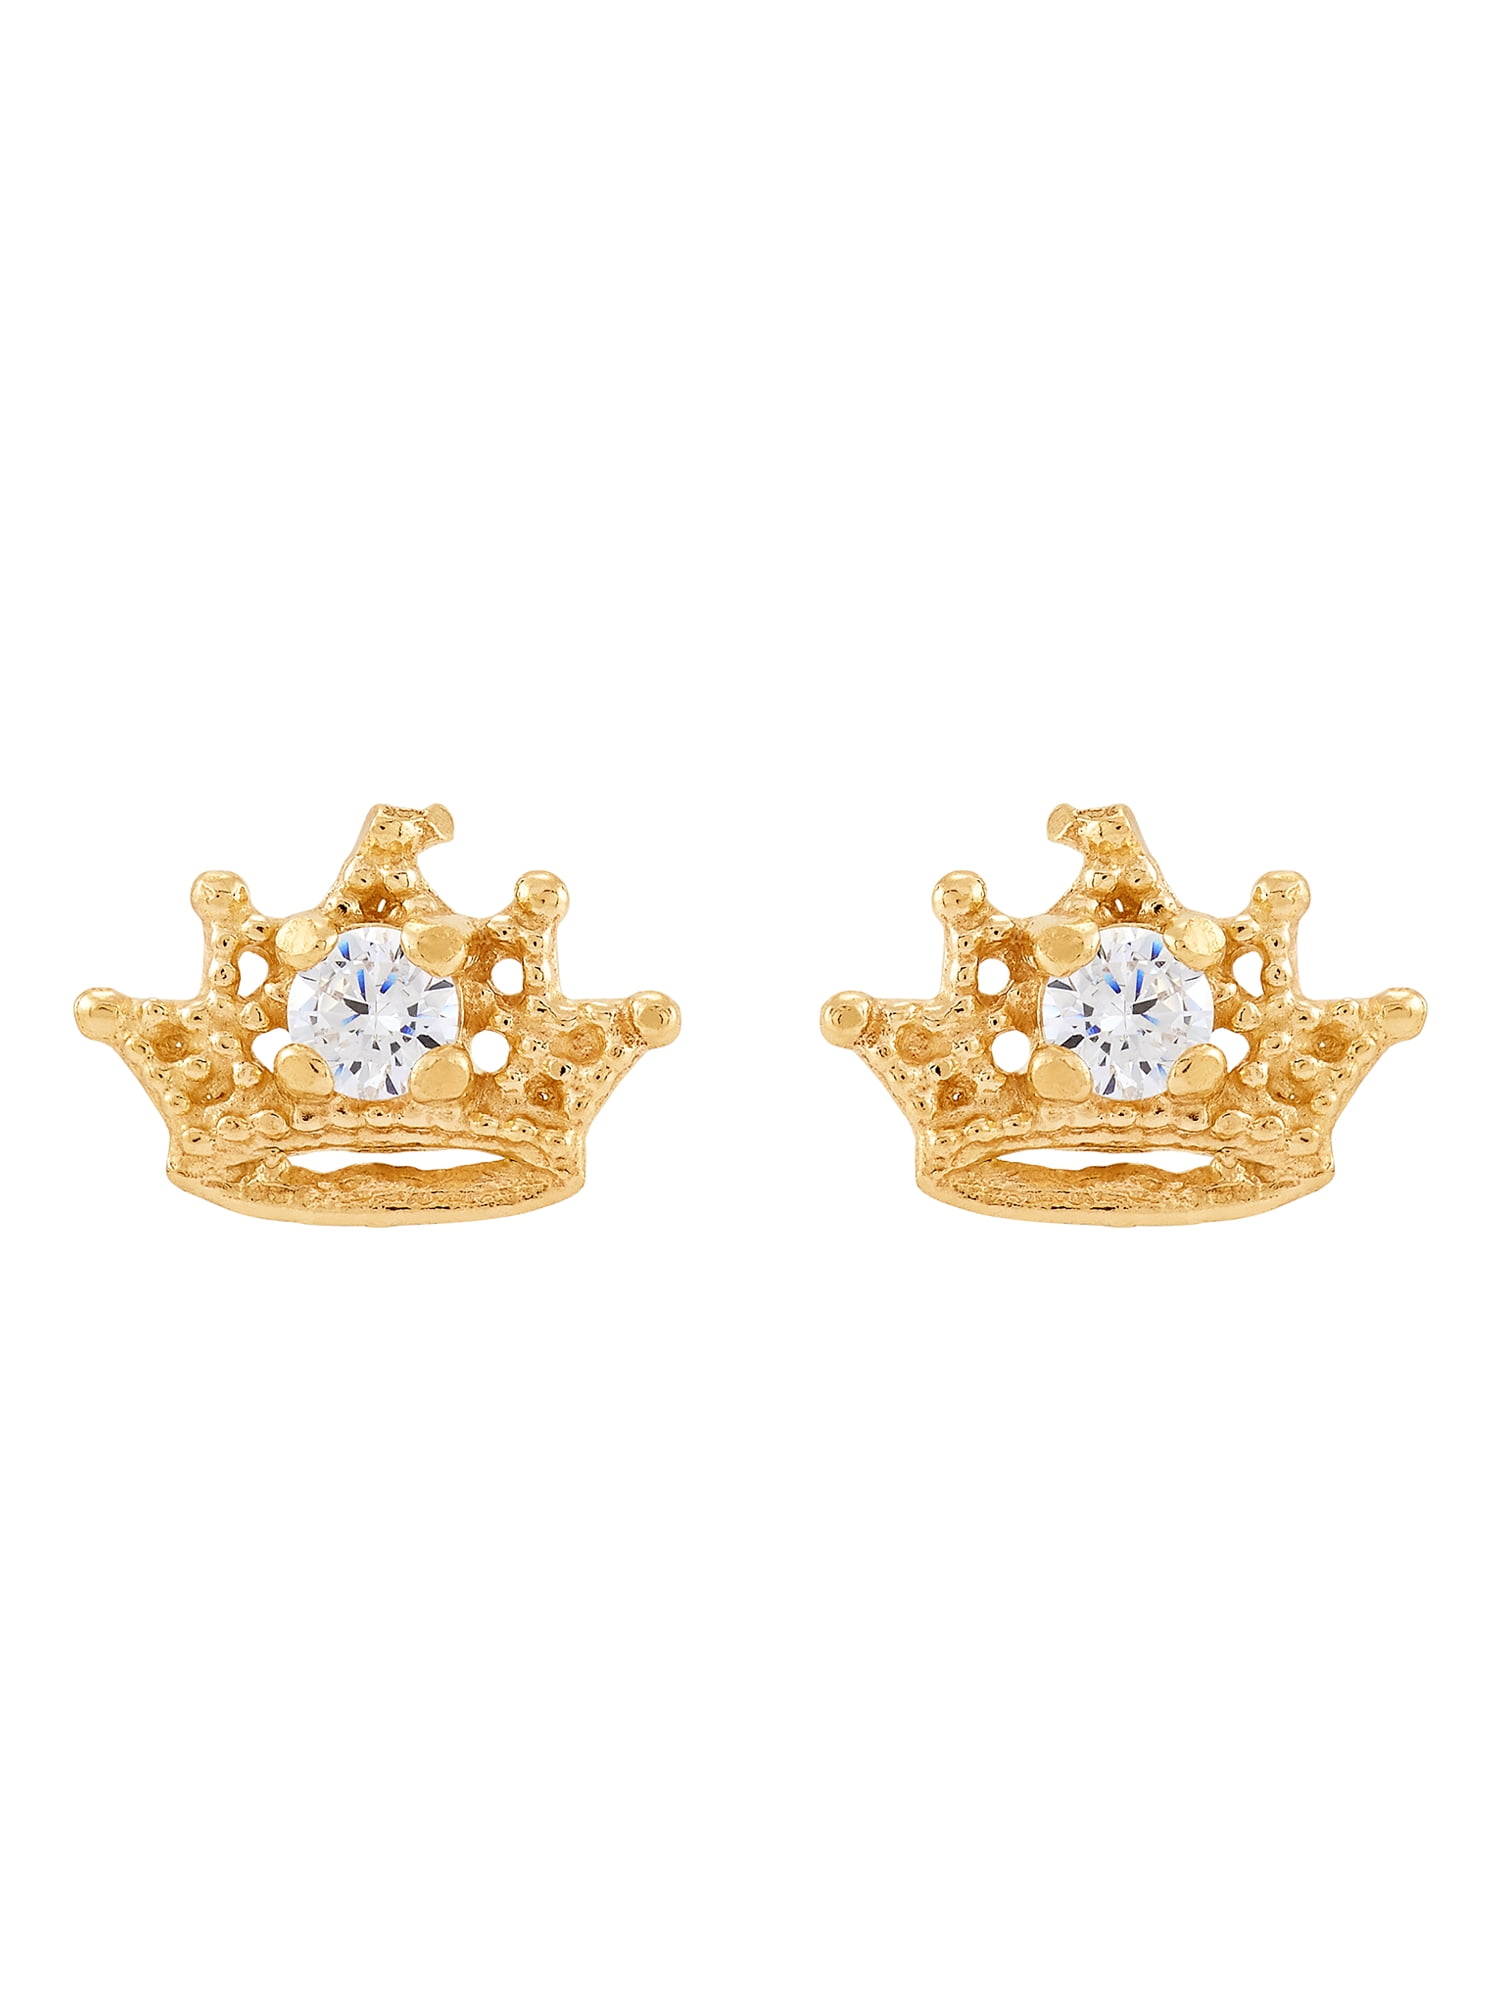 10k Solid Yellow Gold Cubic Zirconia Crown Stud Earring With Safety Screw Back 